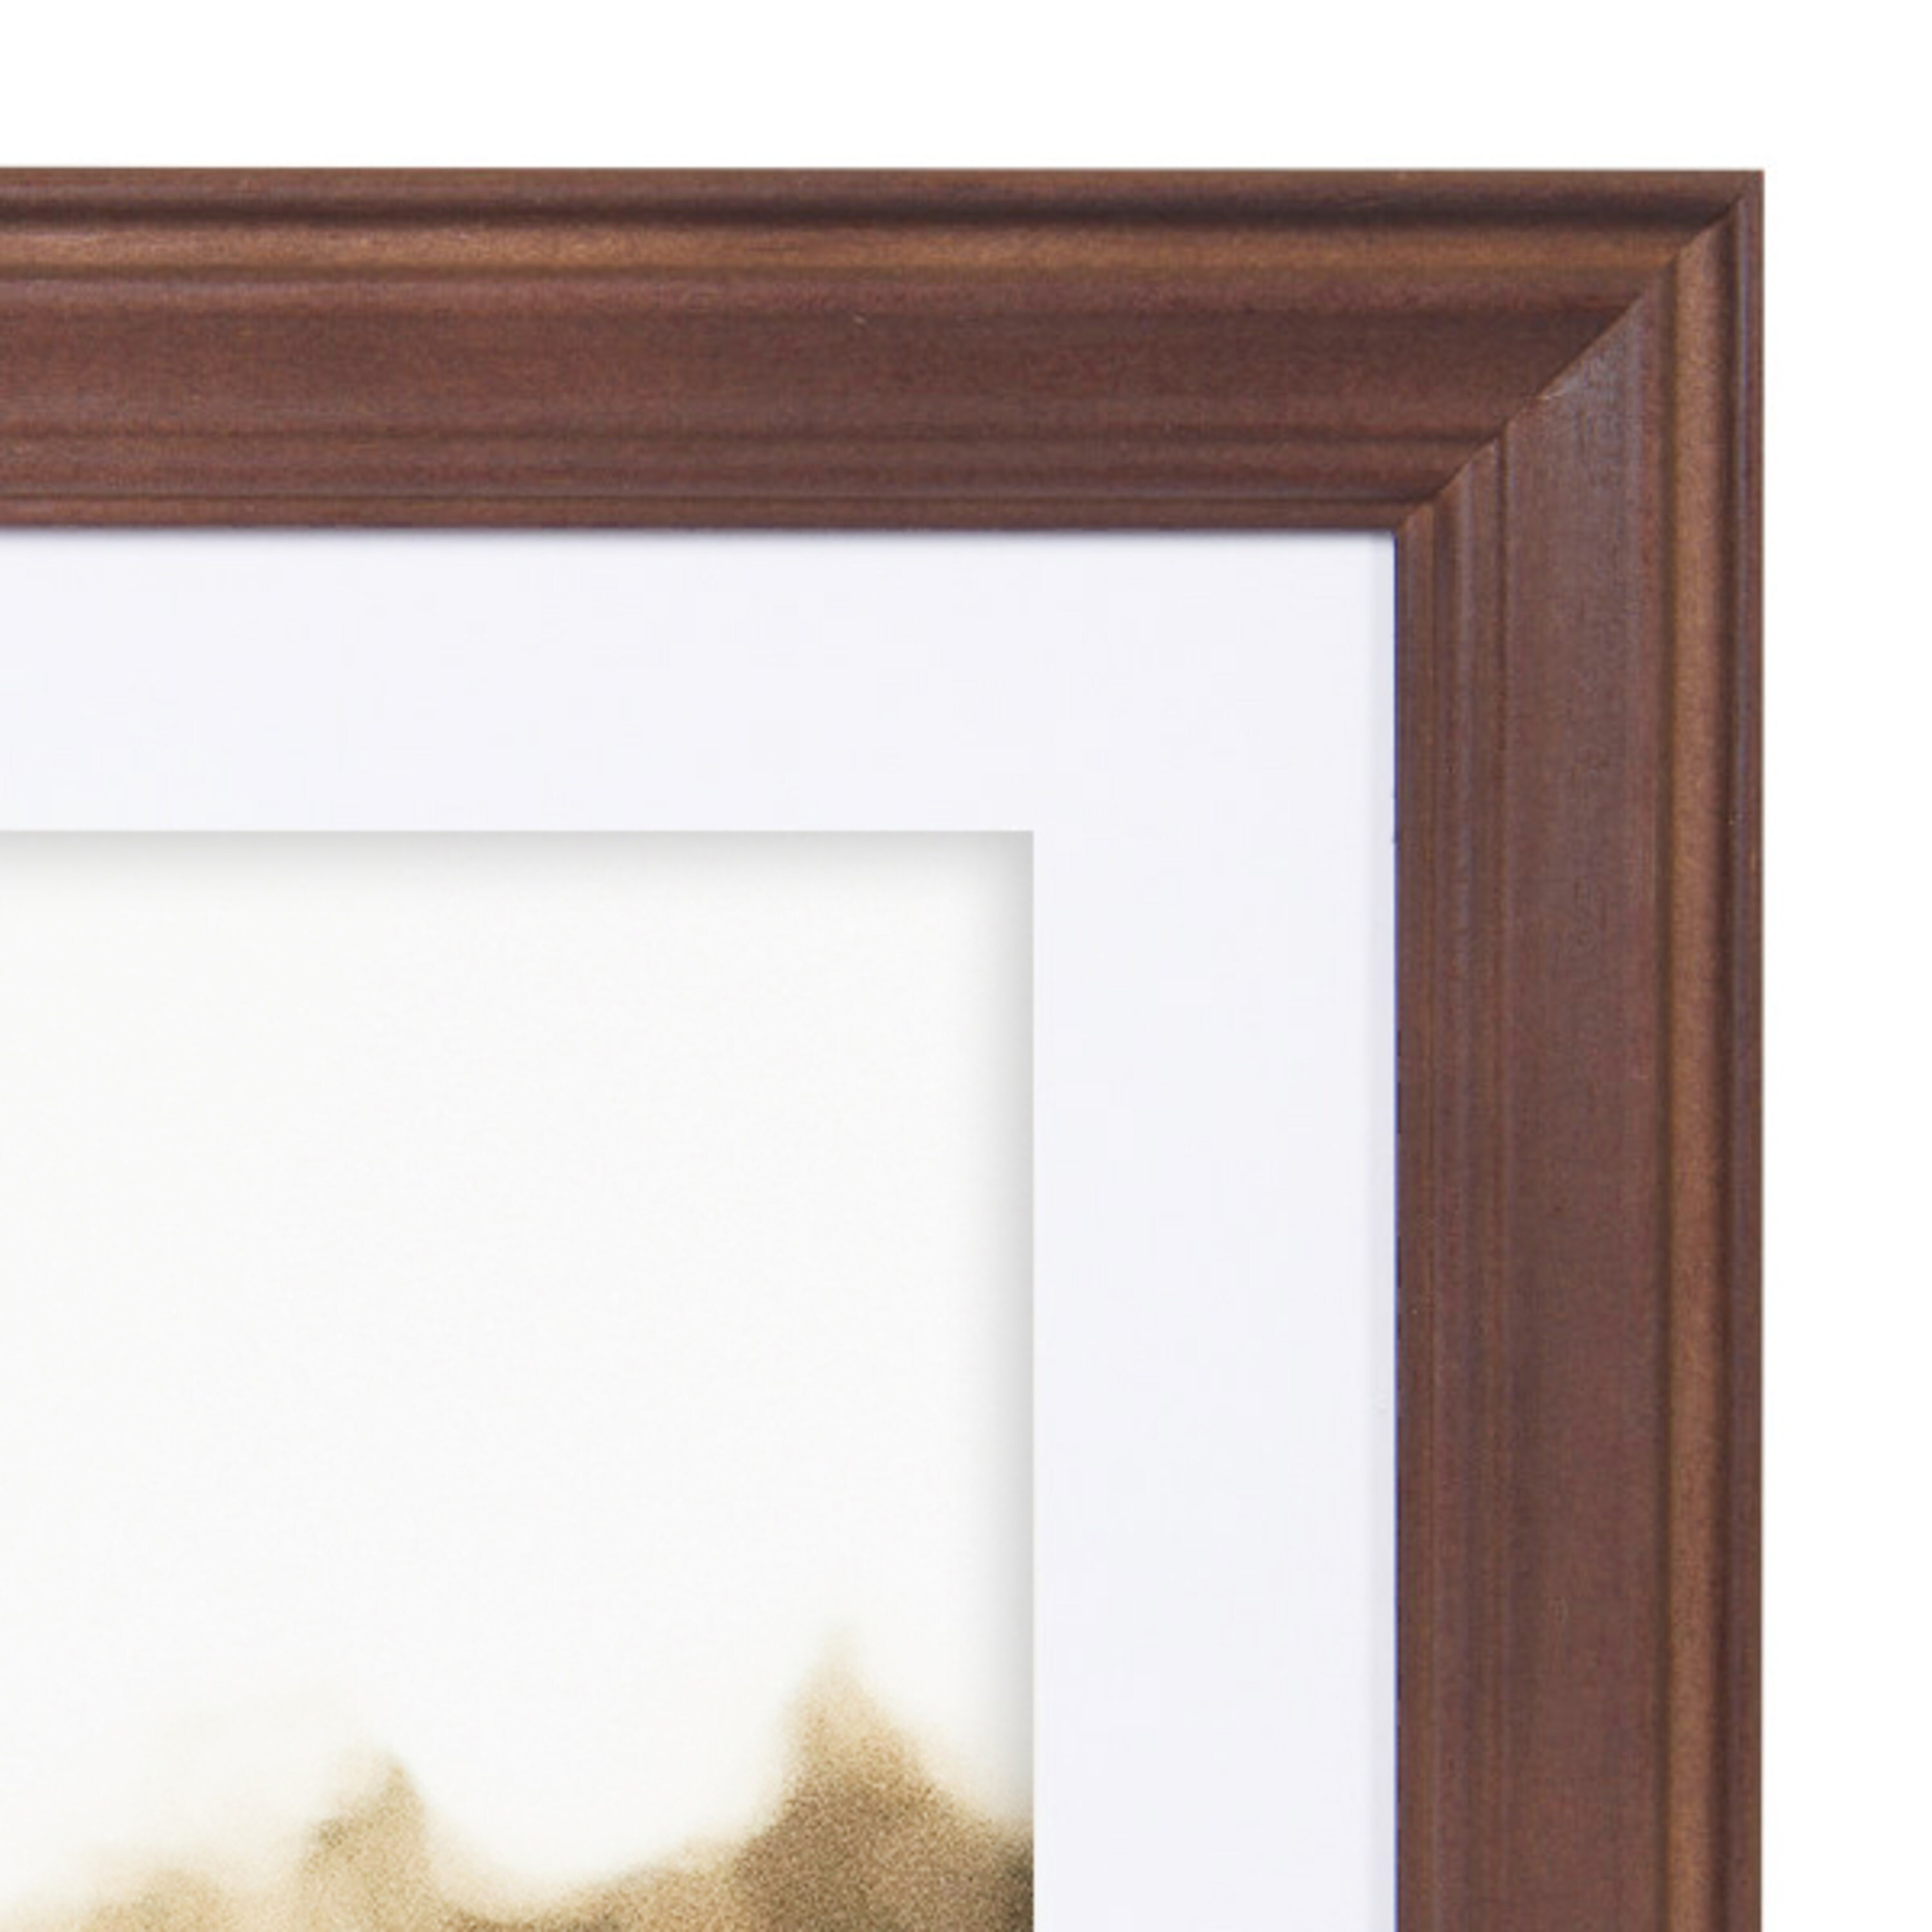 Kate and Laurel Brown Wood Picture Frame (4-in x 6-in) at Lowes.com